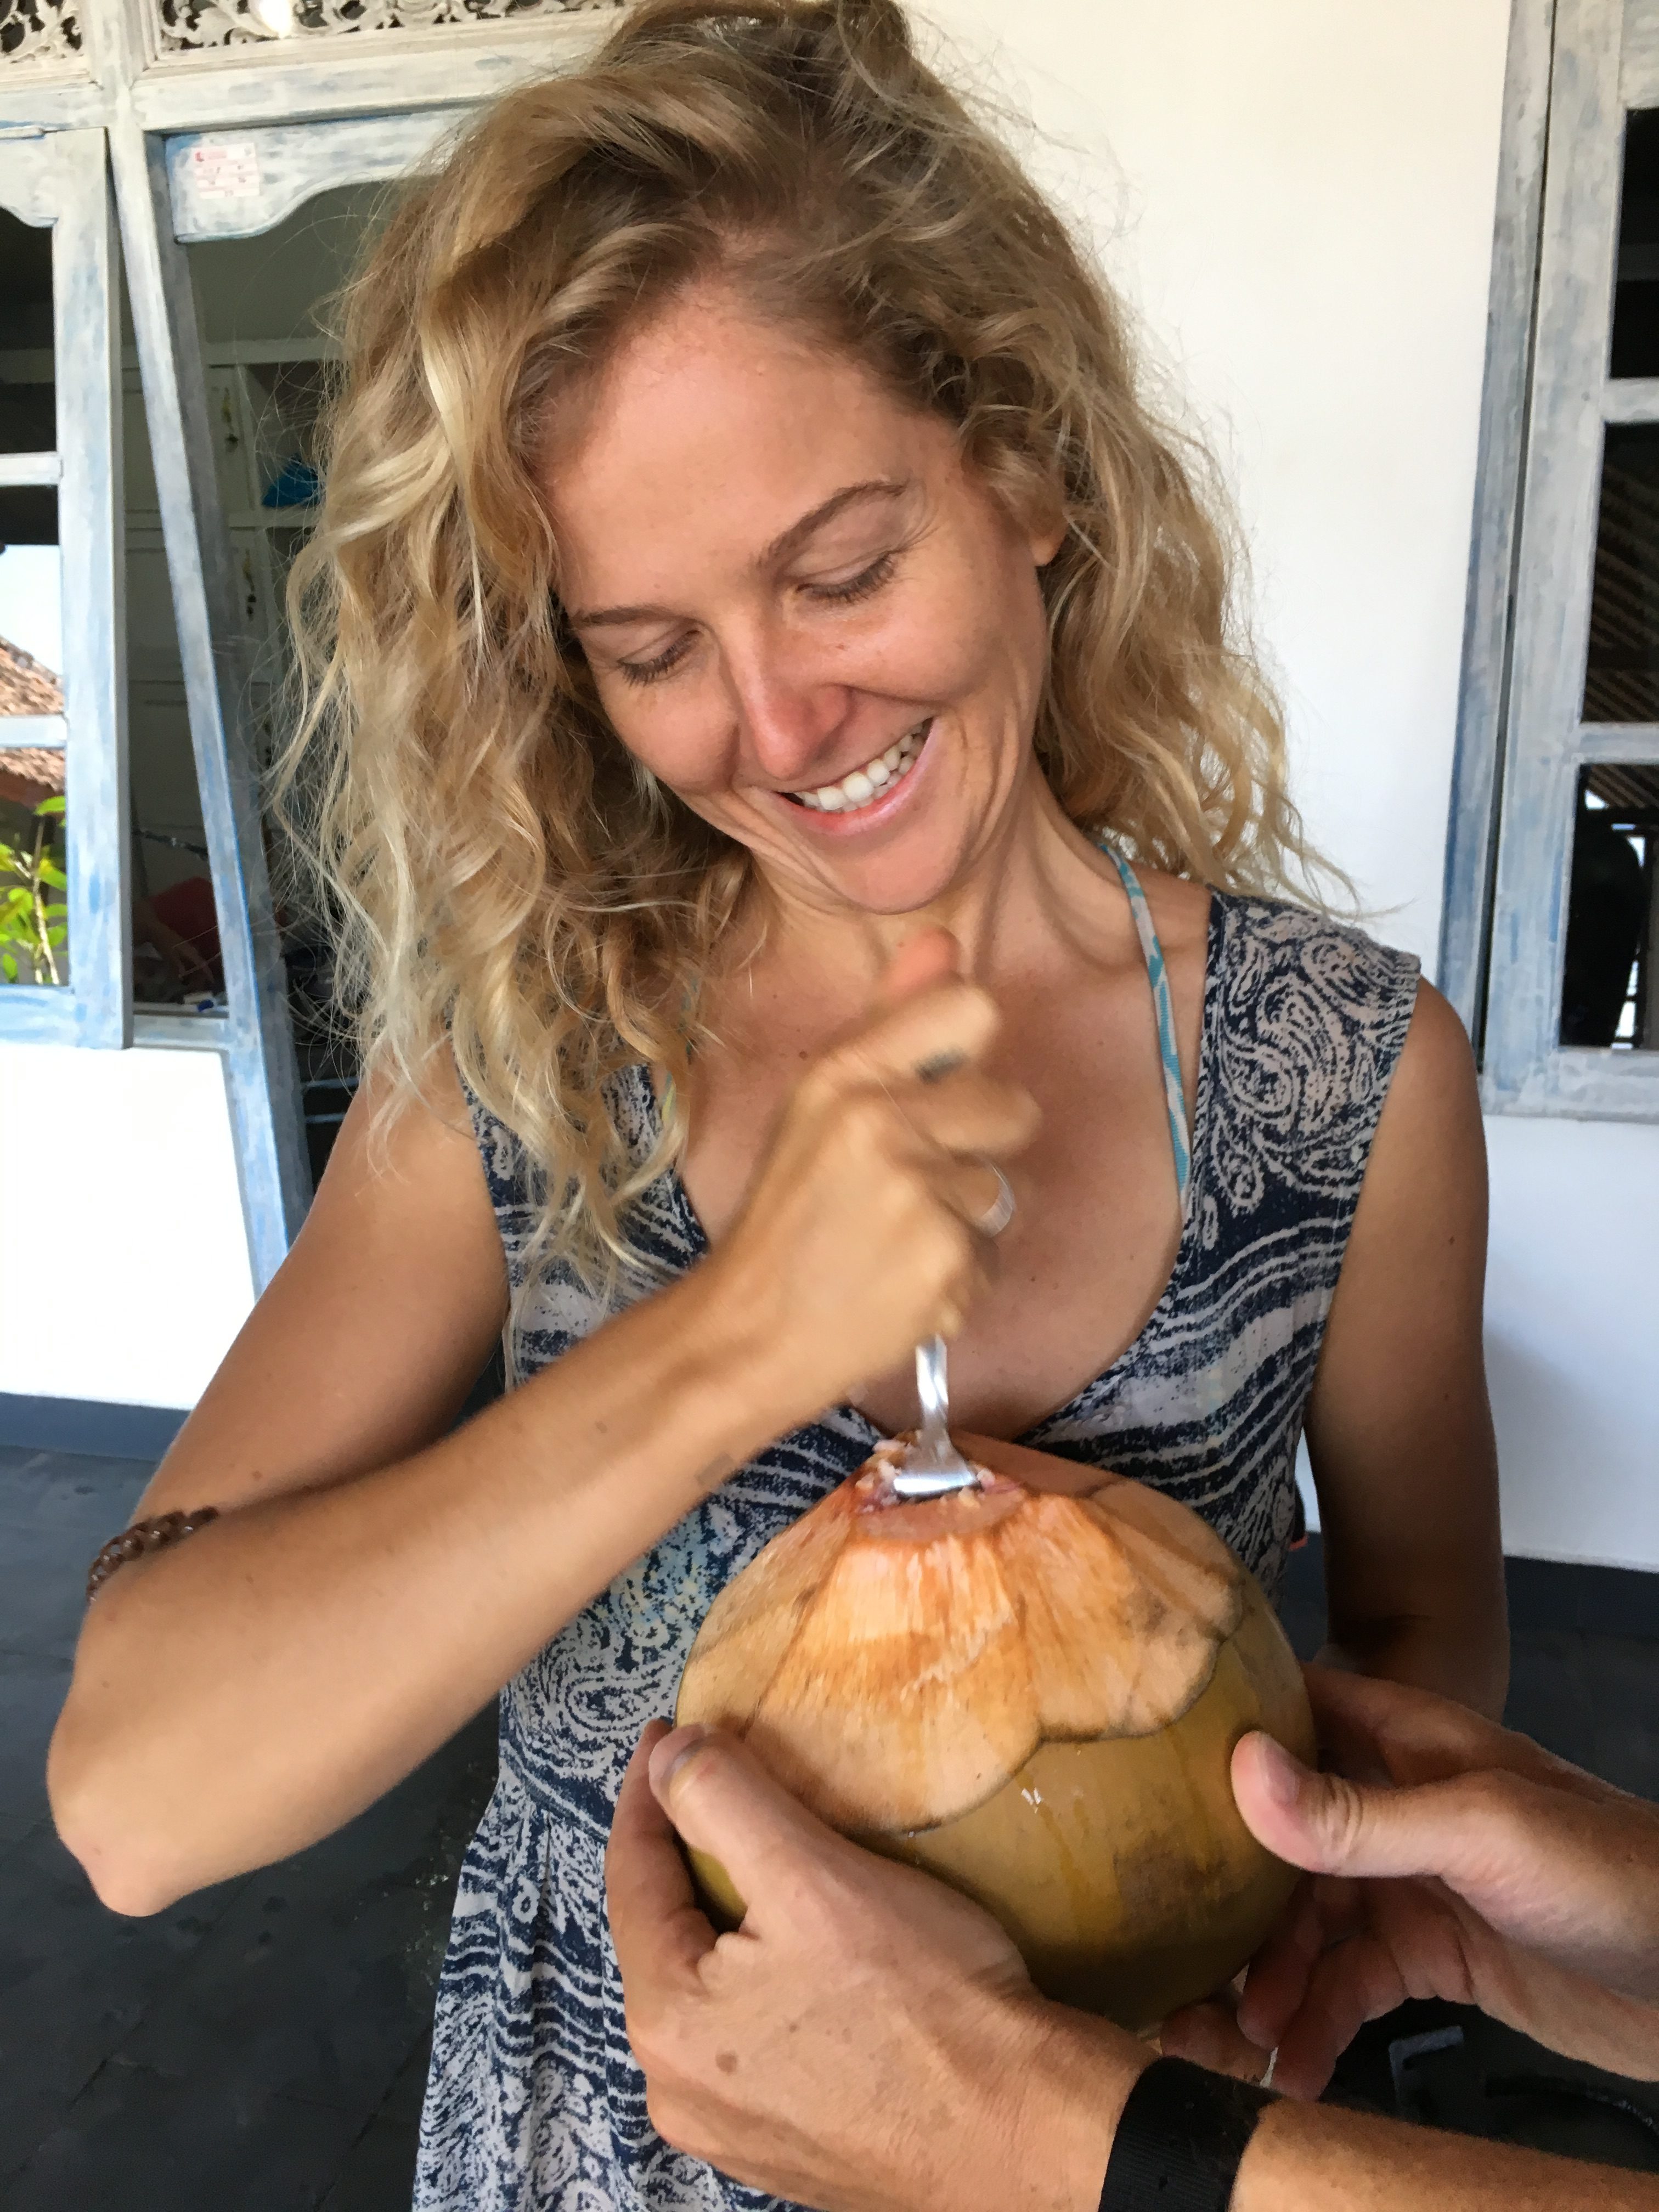 Fresh coconut after the dive